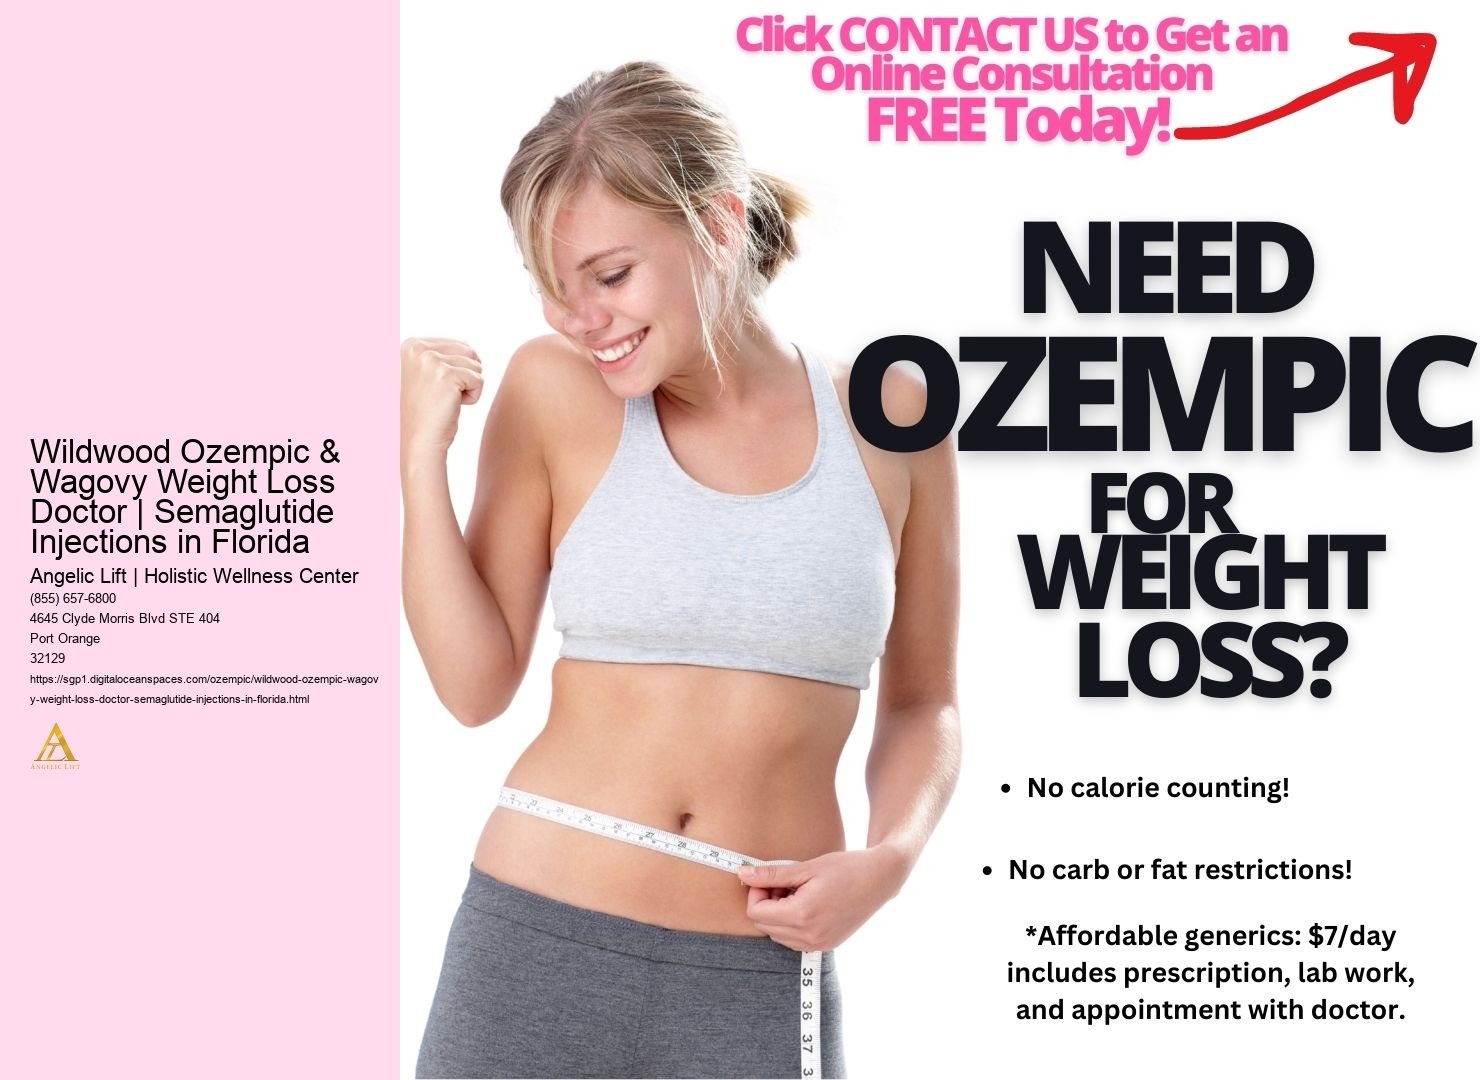 Wildwood Ozempic & Wagovy Weight Loss Doctor | Semaglutide Injections in Florida